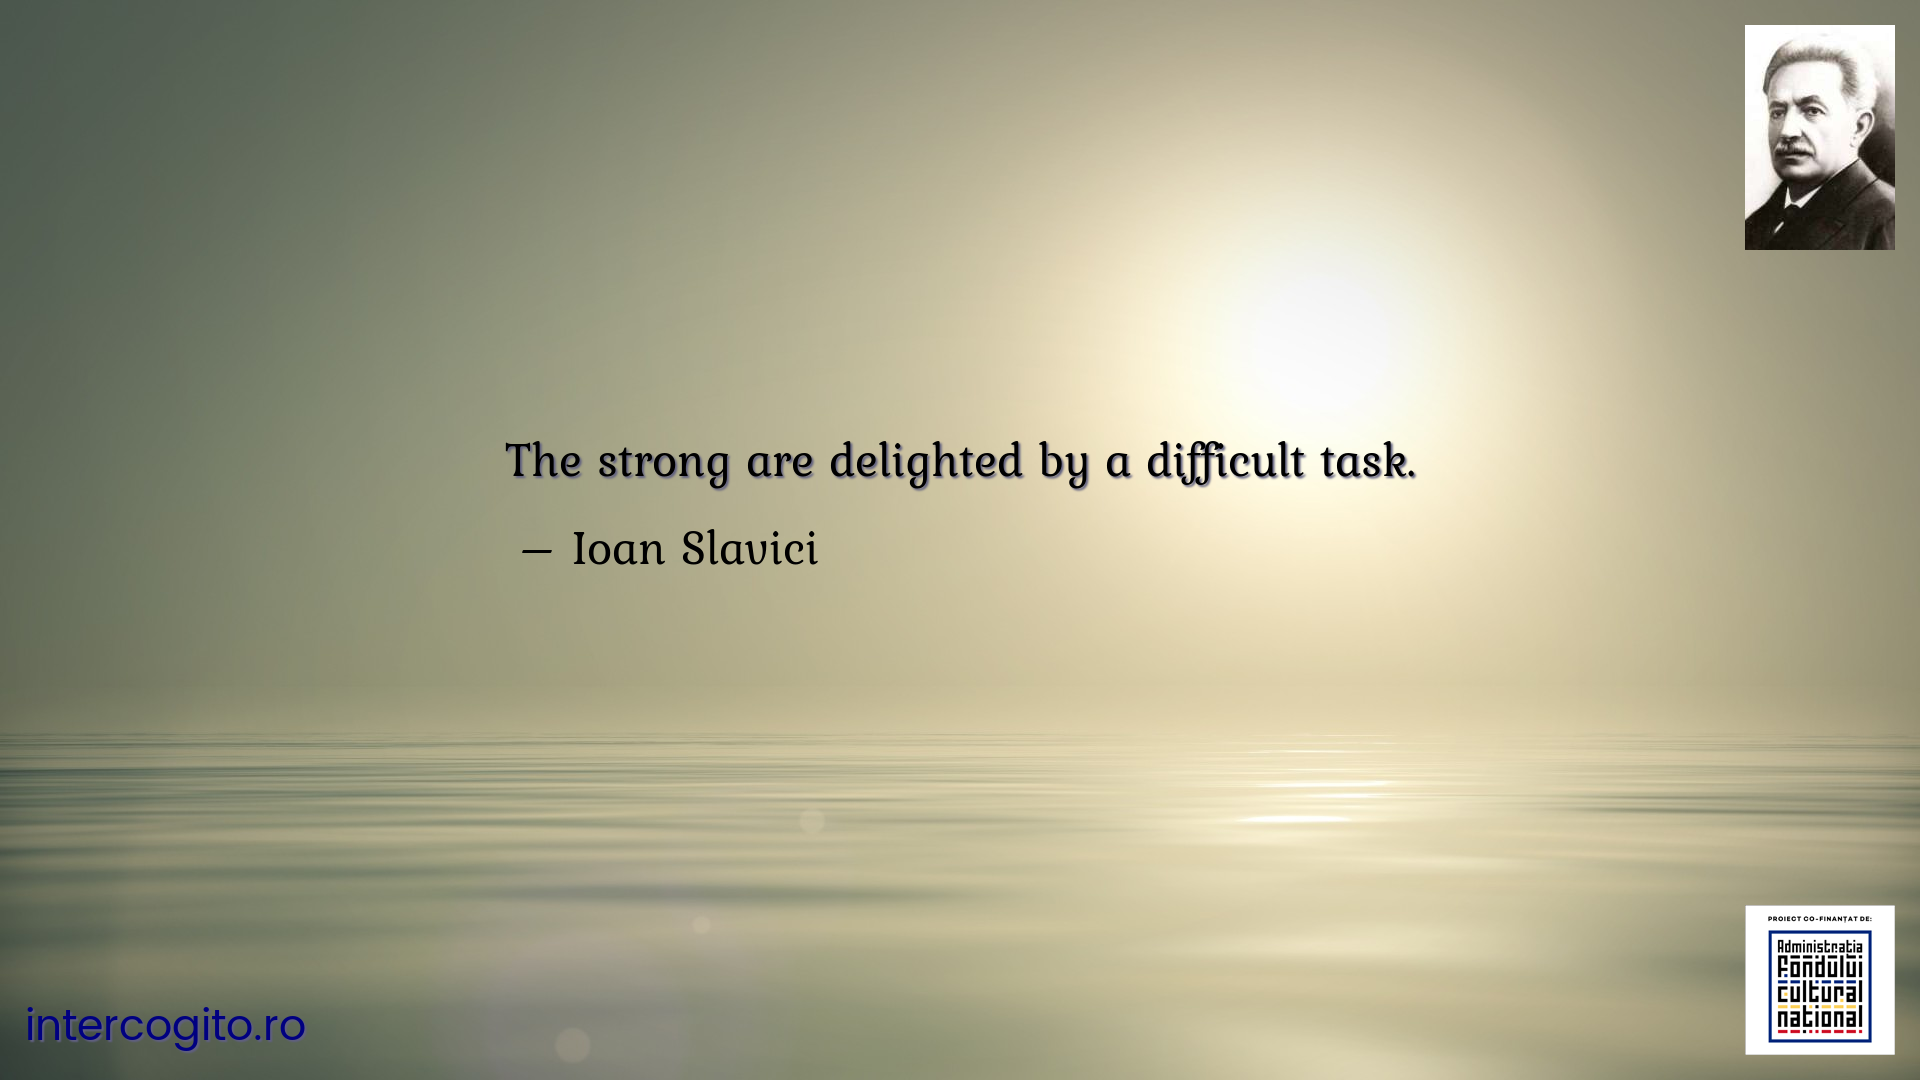 The strong are delighted by a difficult task.